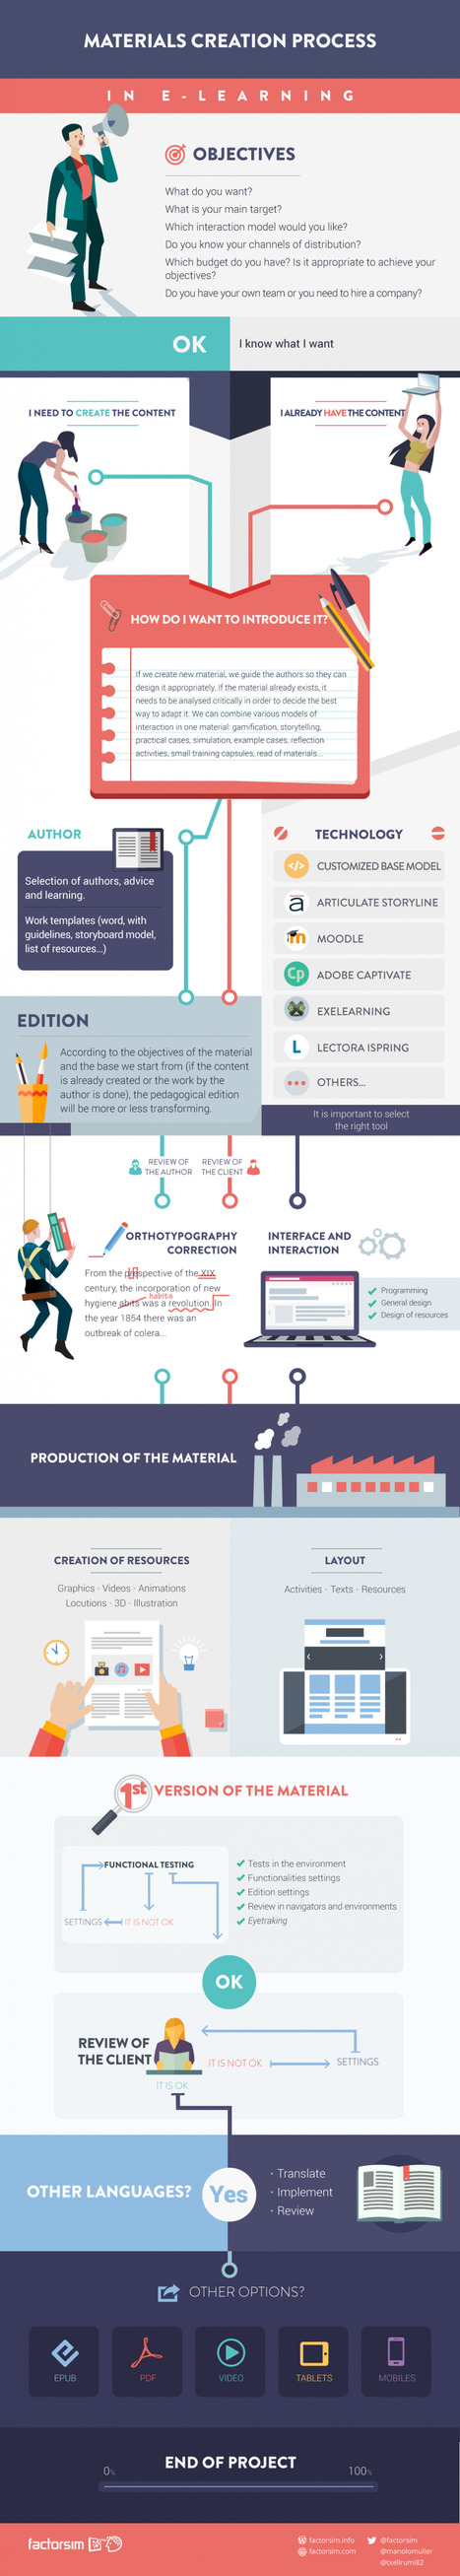 [Infographic] eLearning materials creation process | E-Learning-Inclusivo (Mashup) | Scoop.it